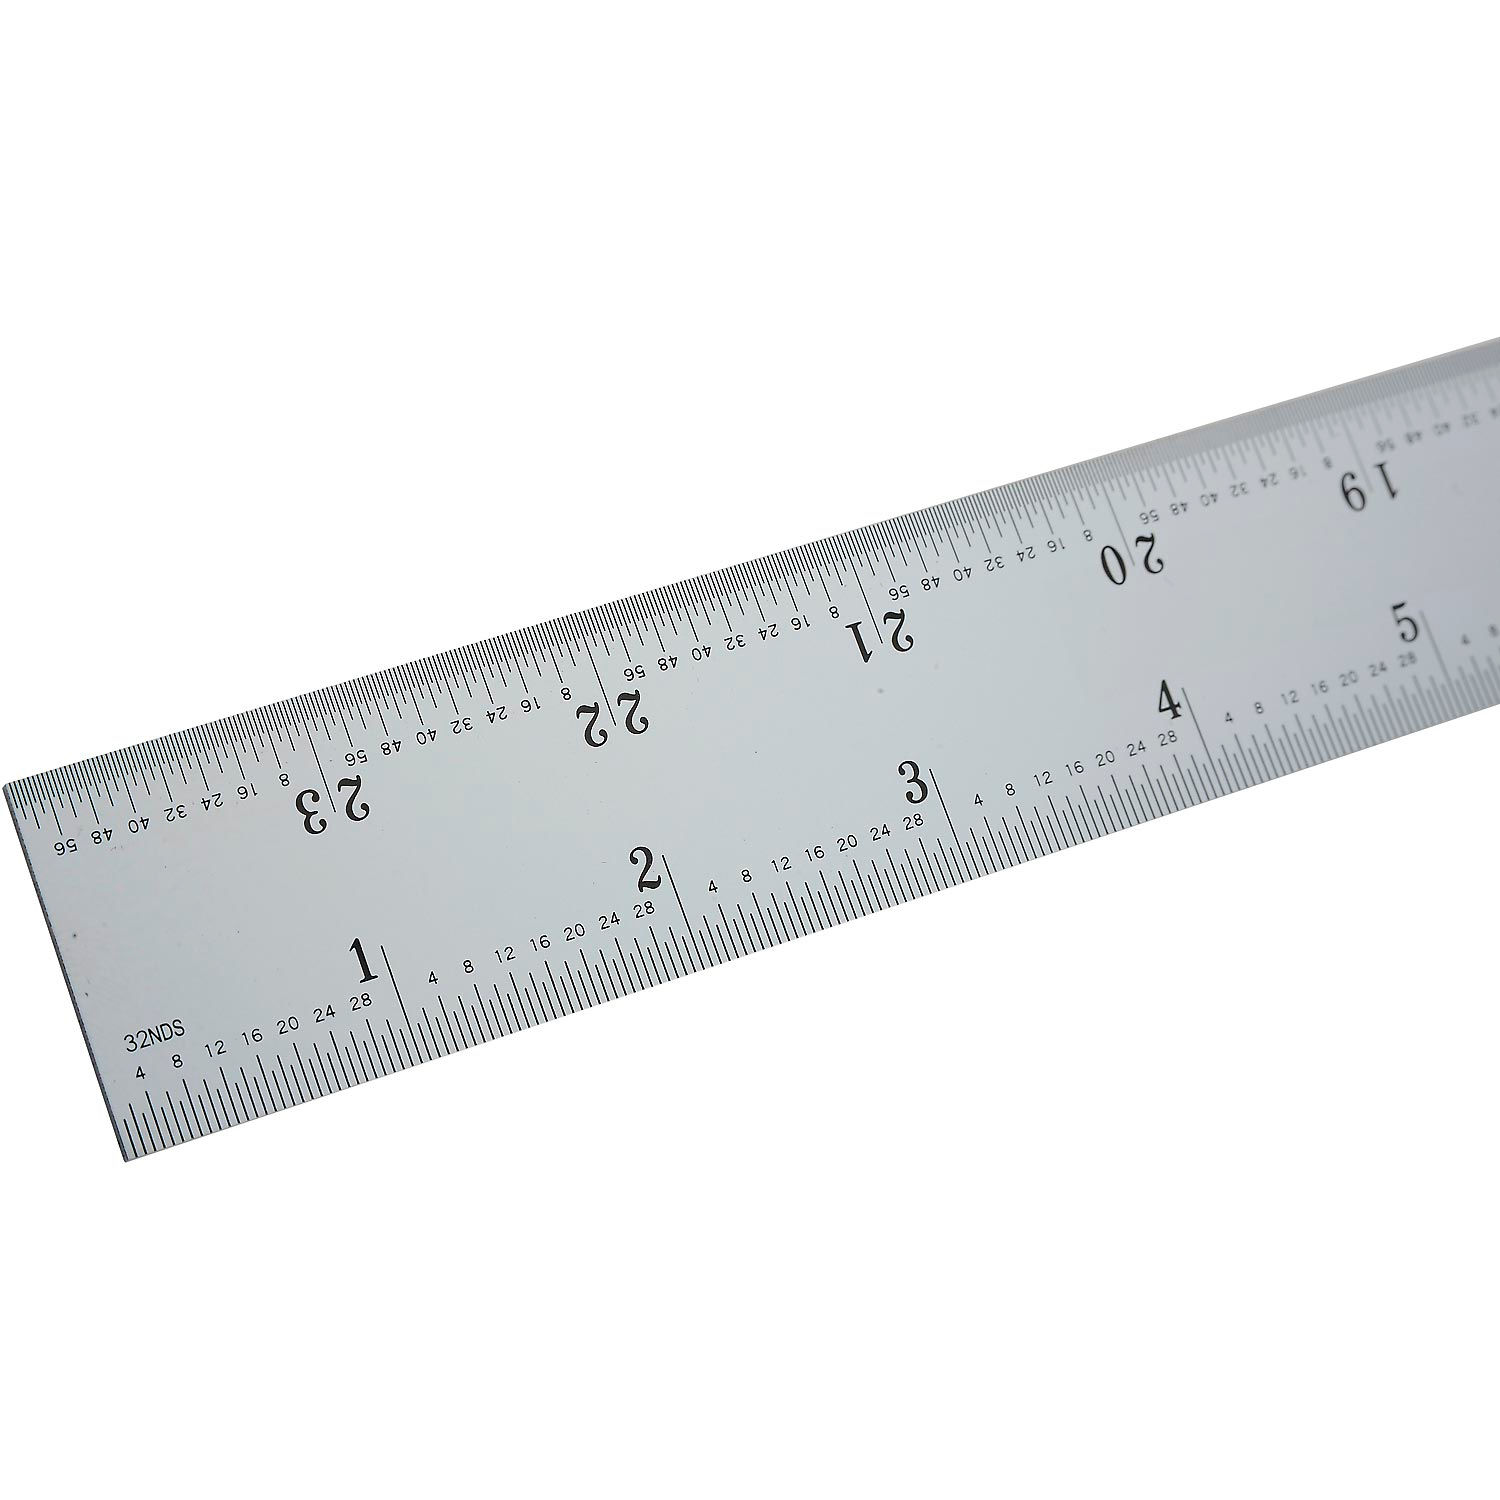 Test Measurement And Inspection Measuring Tapes Lasers Rulers